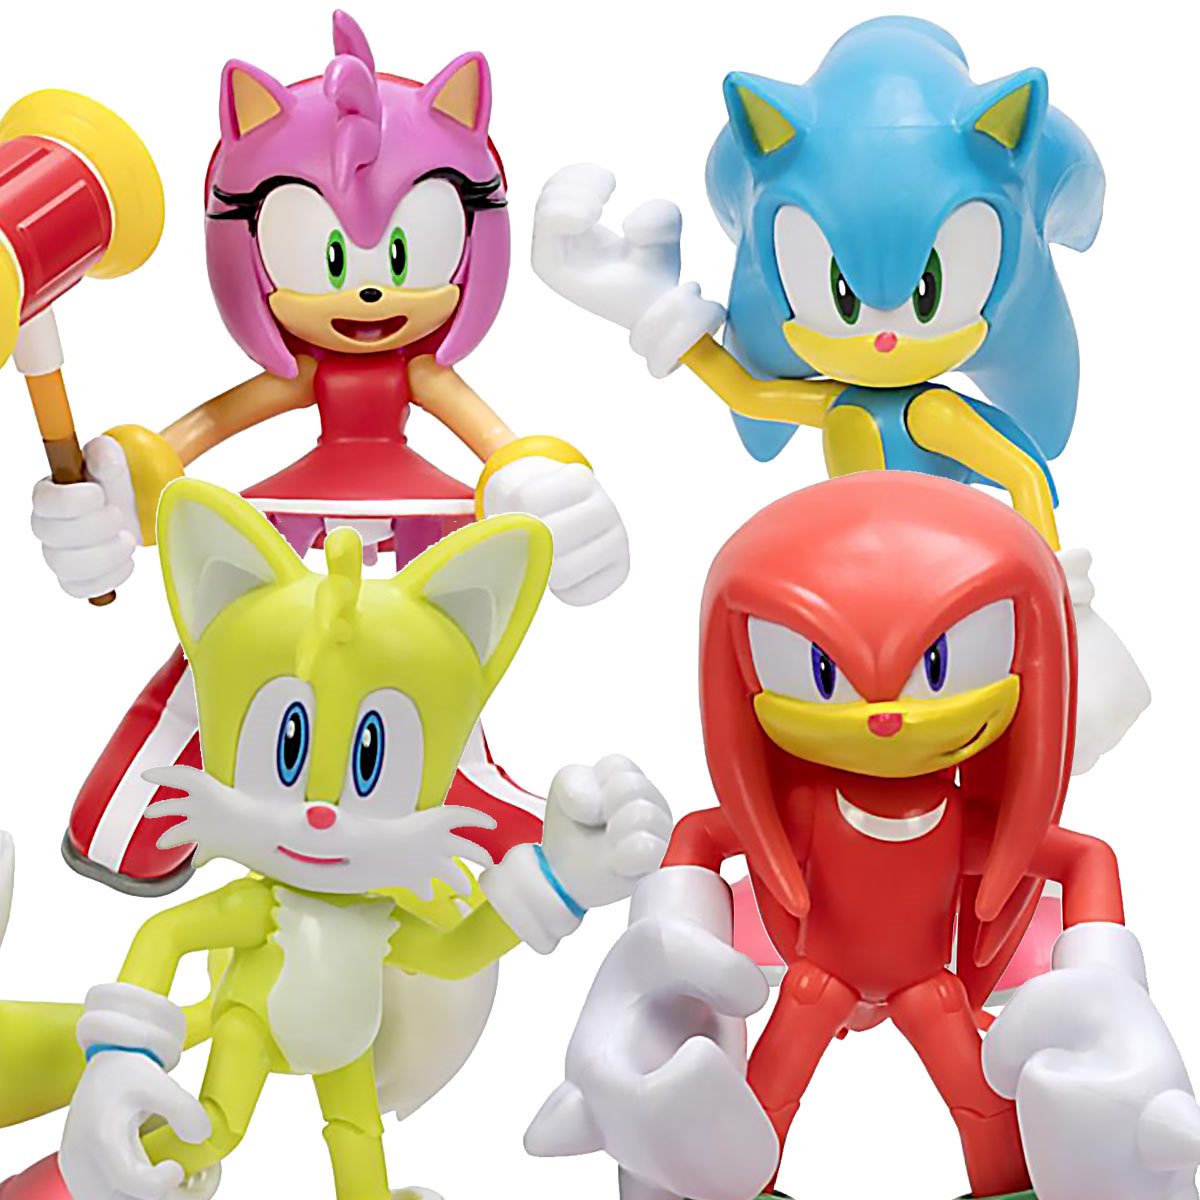  Sonic the Hedgehog Sonic 4 Action Figure 2 Pack - Modern Sonic  & Modern Metal Sonic : Toys & Games